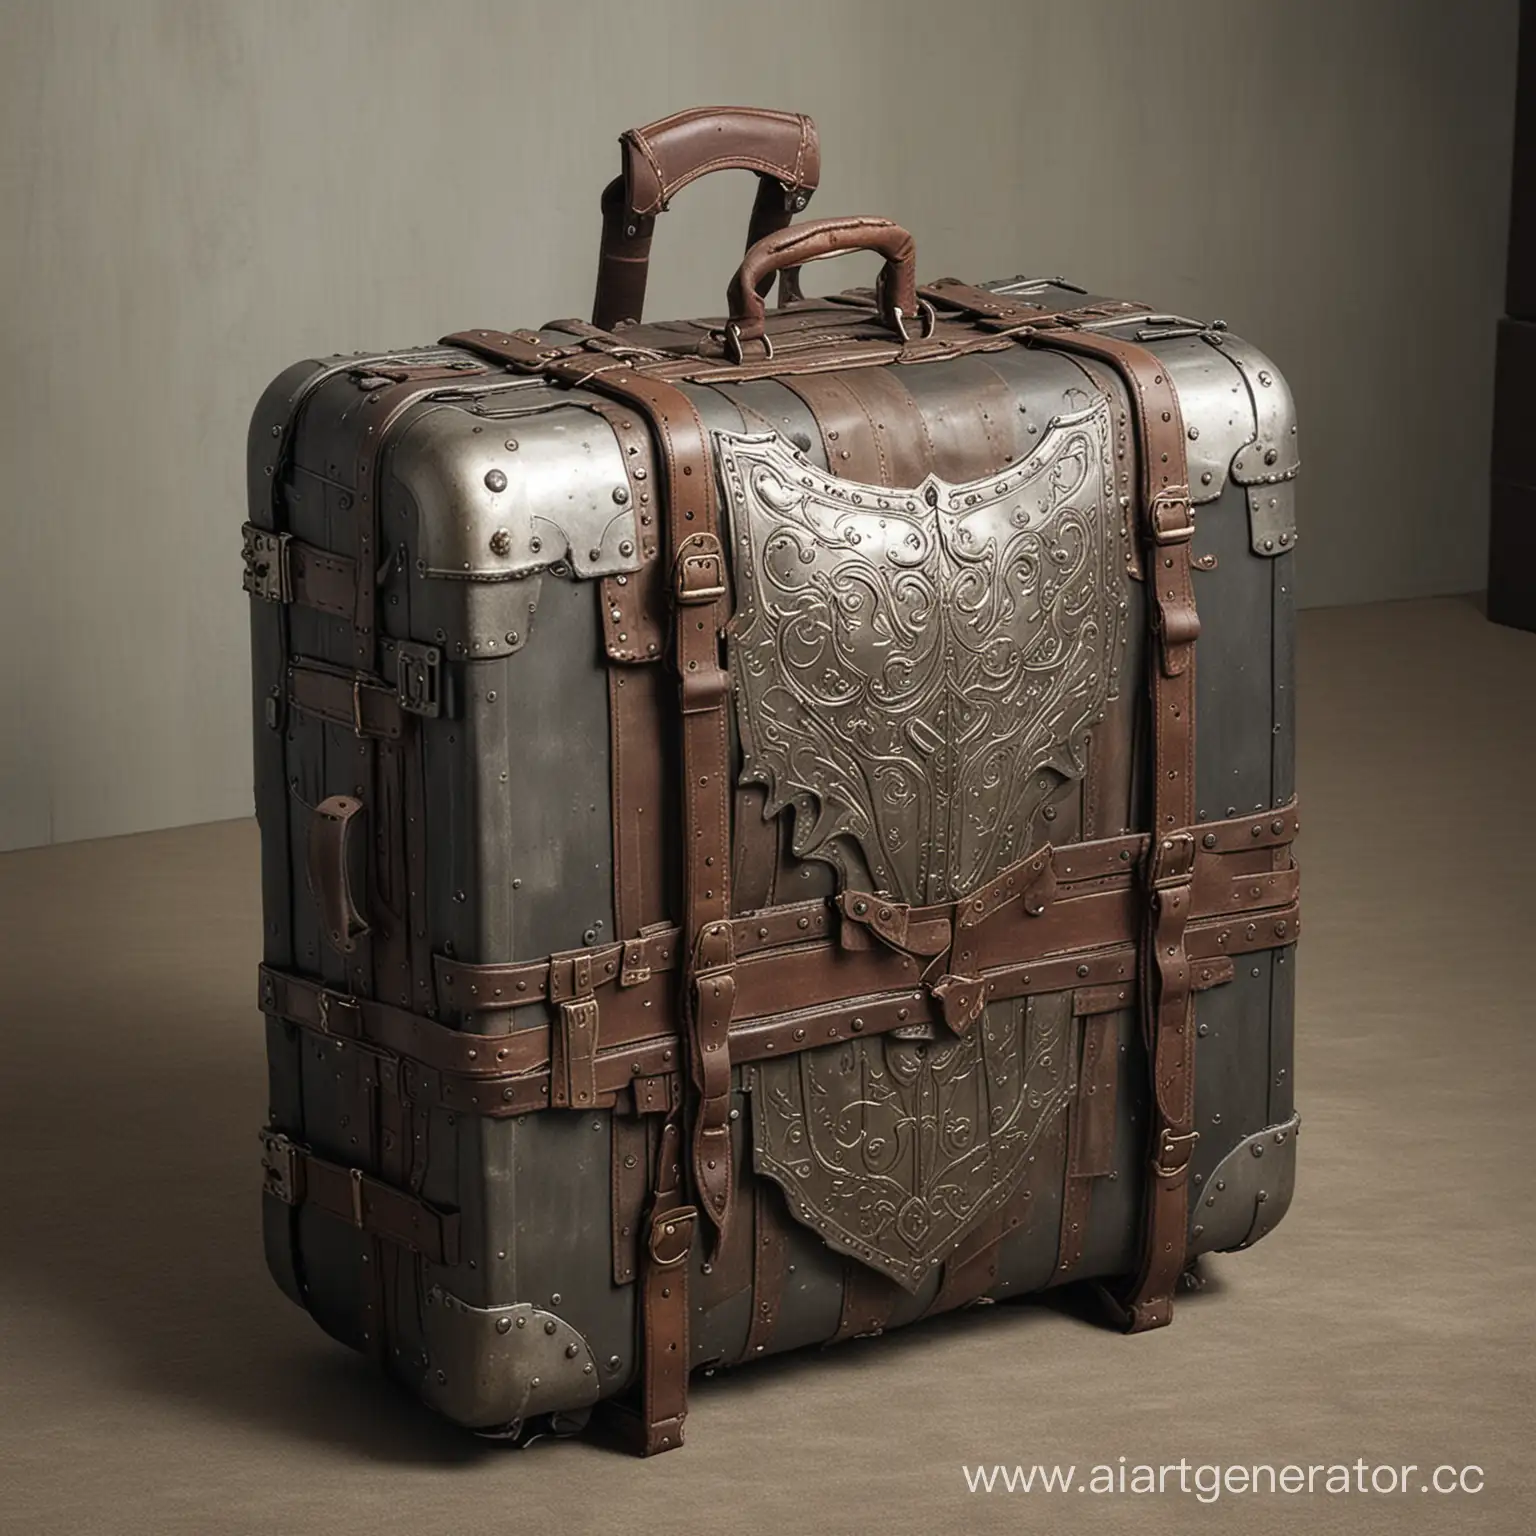 Armored-Suitcase-Amidst-Medieval-Knights